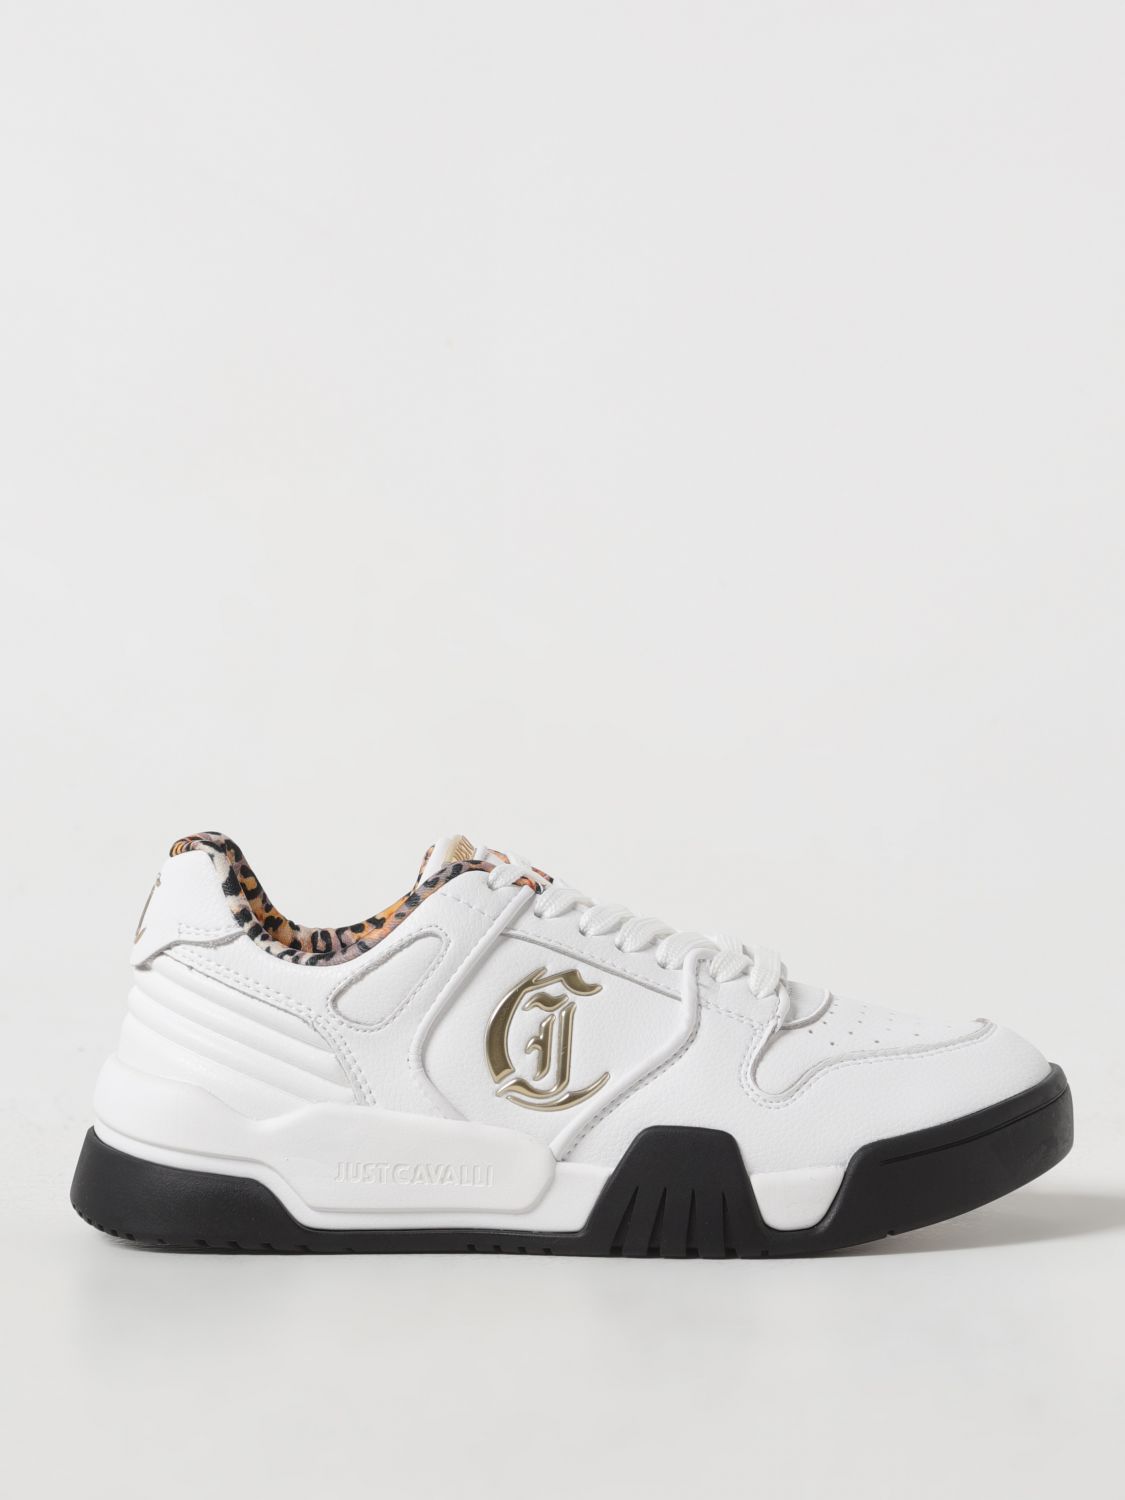 JUST CAVALLI SNEAKERS JUST CAVALLI WOMAN COLOR WHITE,F37847001